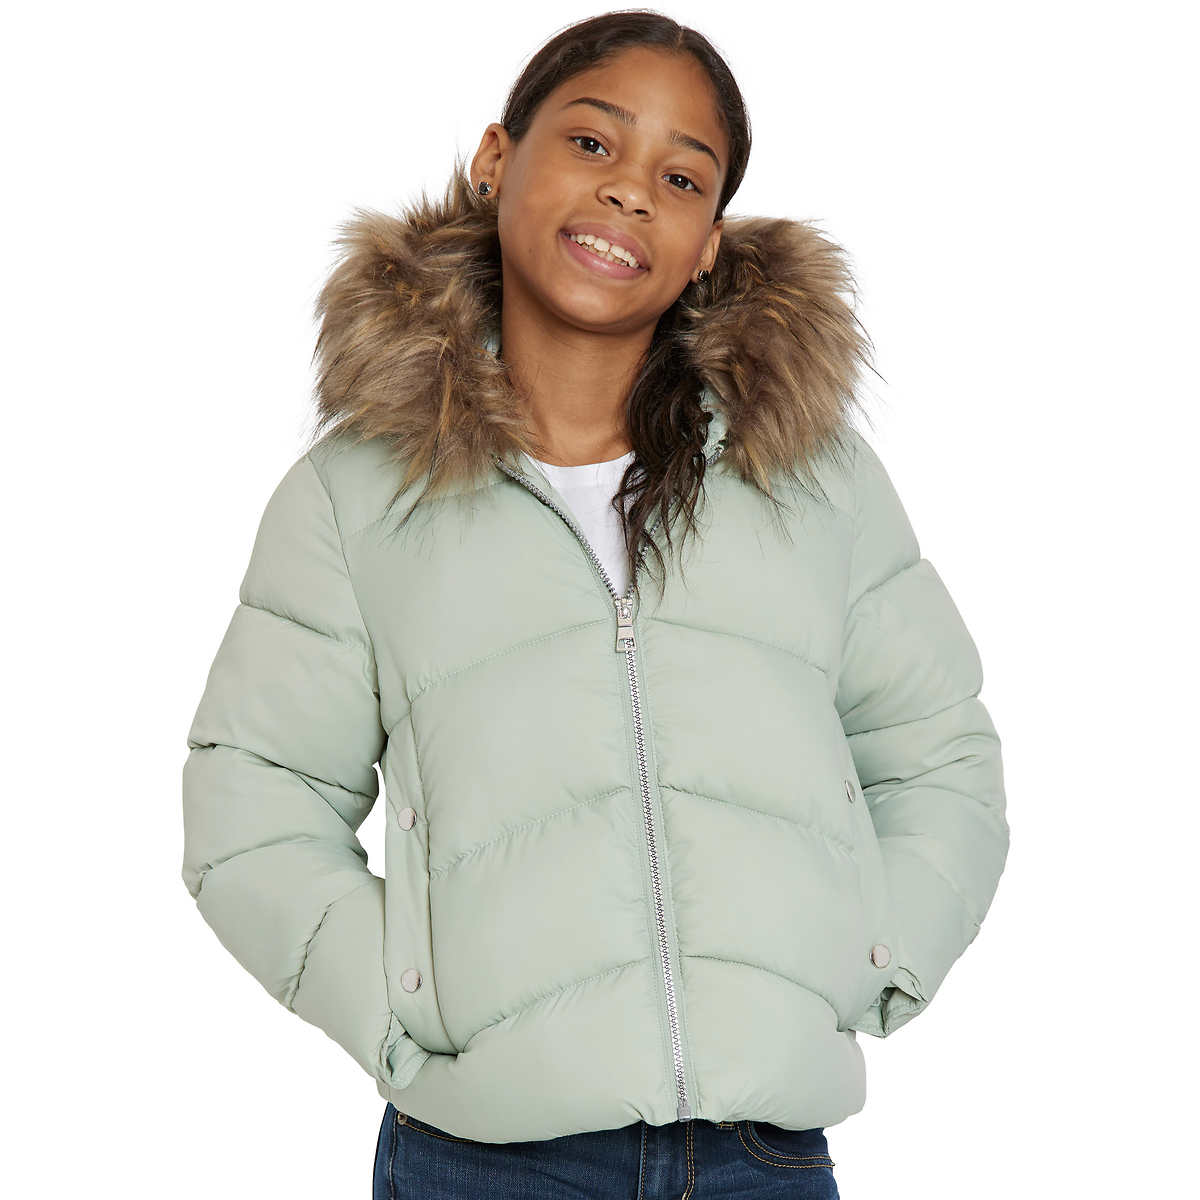 Rothschild Youth Puffer Jacket | Costco